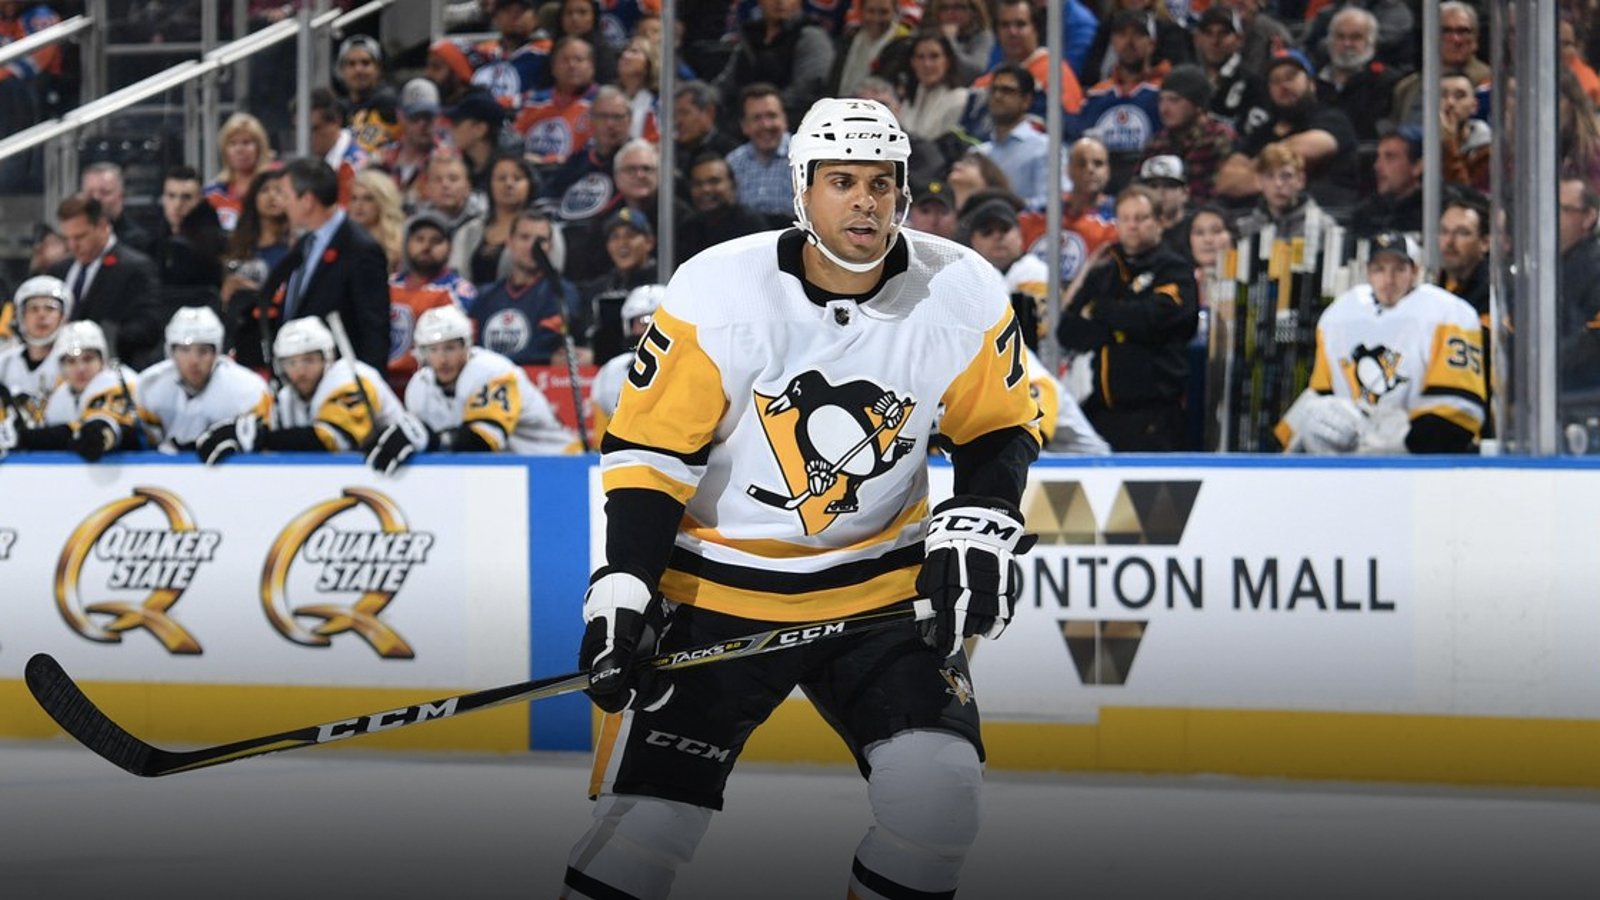 Report: Fans are still divided on Reaves trade